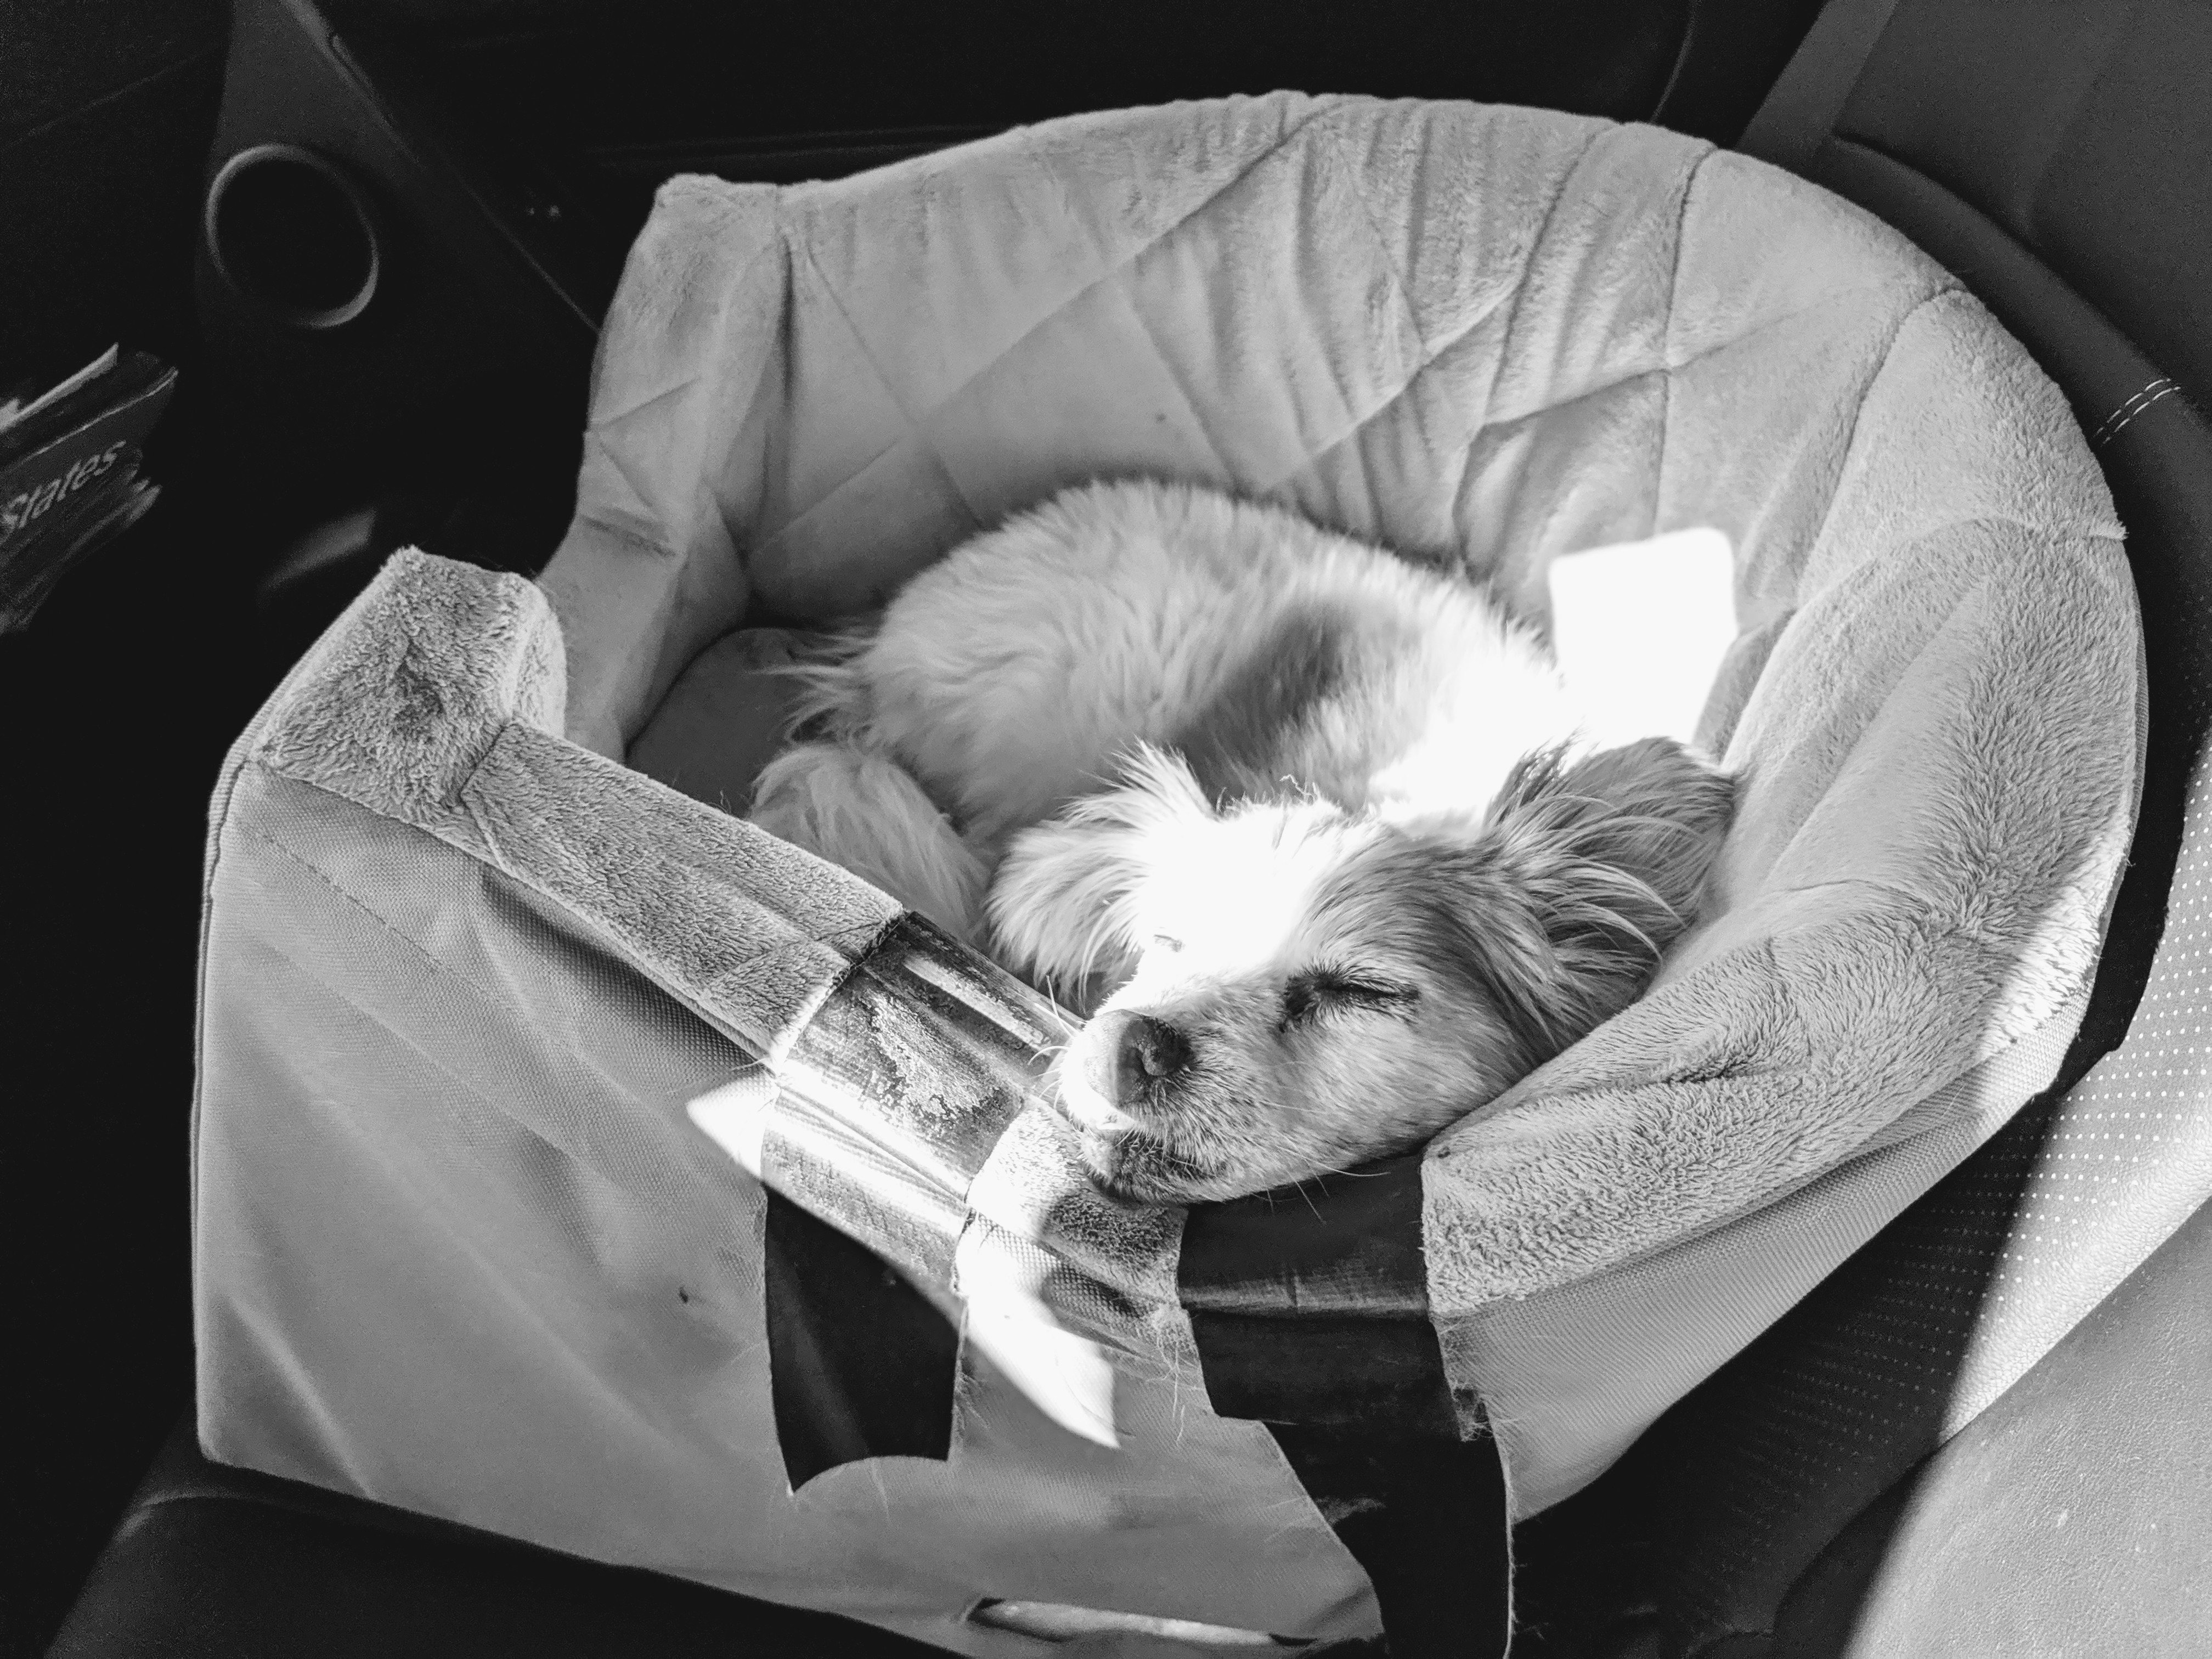 An image of a sleeping dog in a carrier. Right across the dog's face and body is a beam of sunlight, creating sharp contrast. 